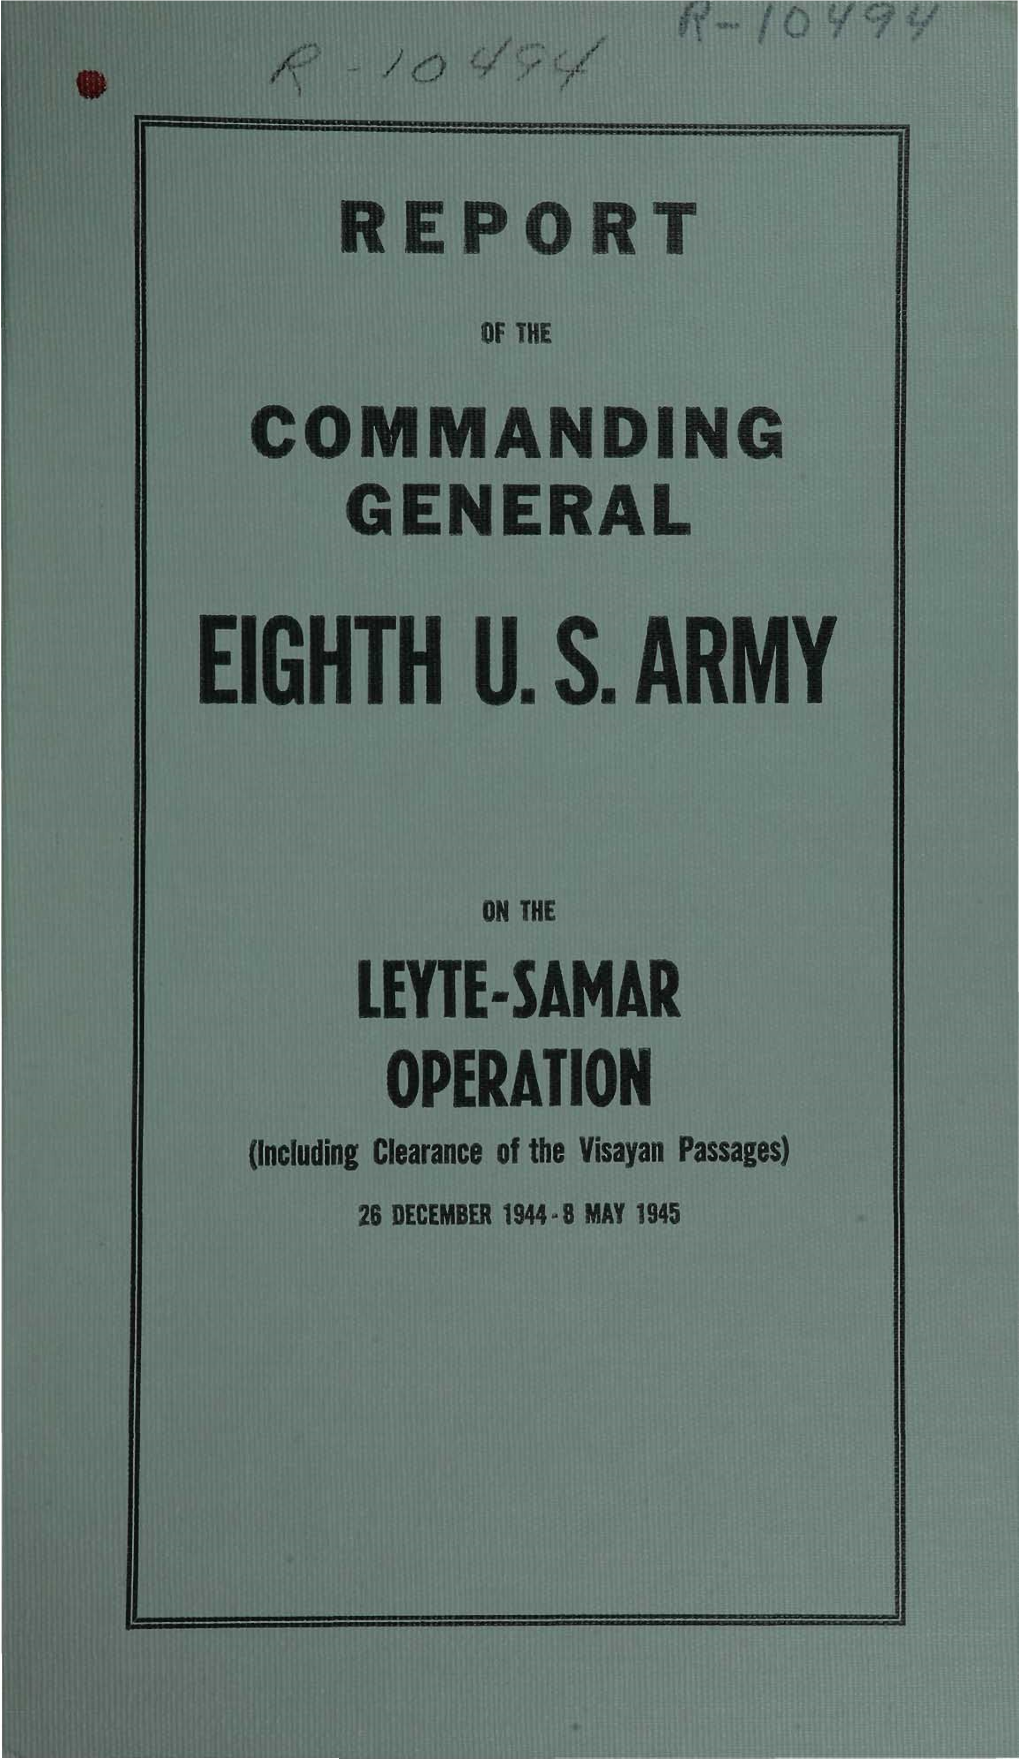 LEYTE-SAMAR OPERATION (Including Clearance of the Visayan Passages) 28 DECEMBER 1944-8 MAY 1945 REPORT O/? the COM NDING GENERAL